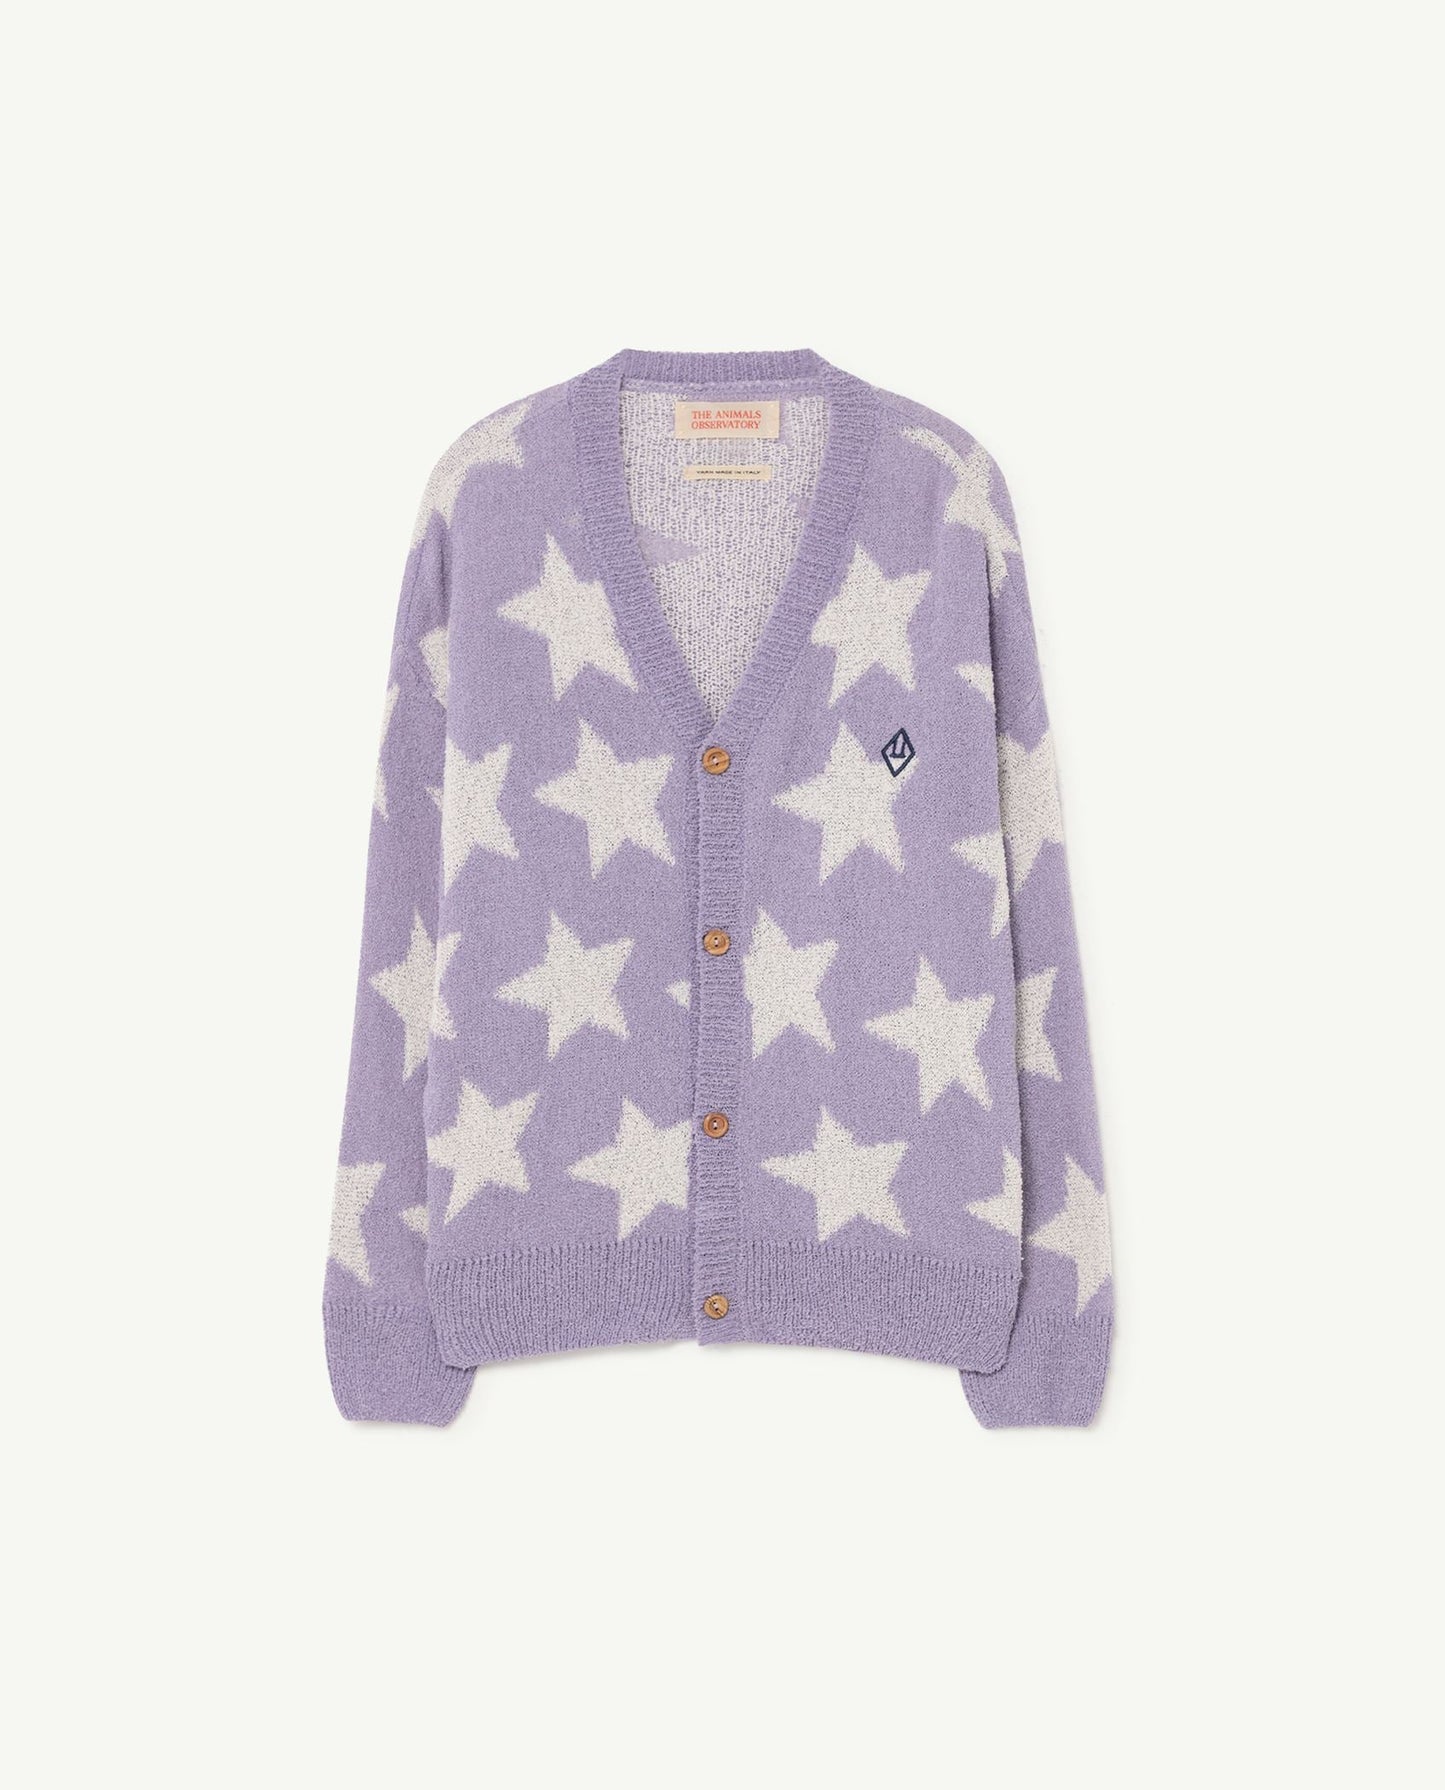 Stars racoon Cardigan Lavender Knitwear The Animals Observatory 